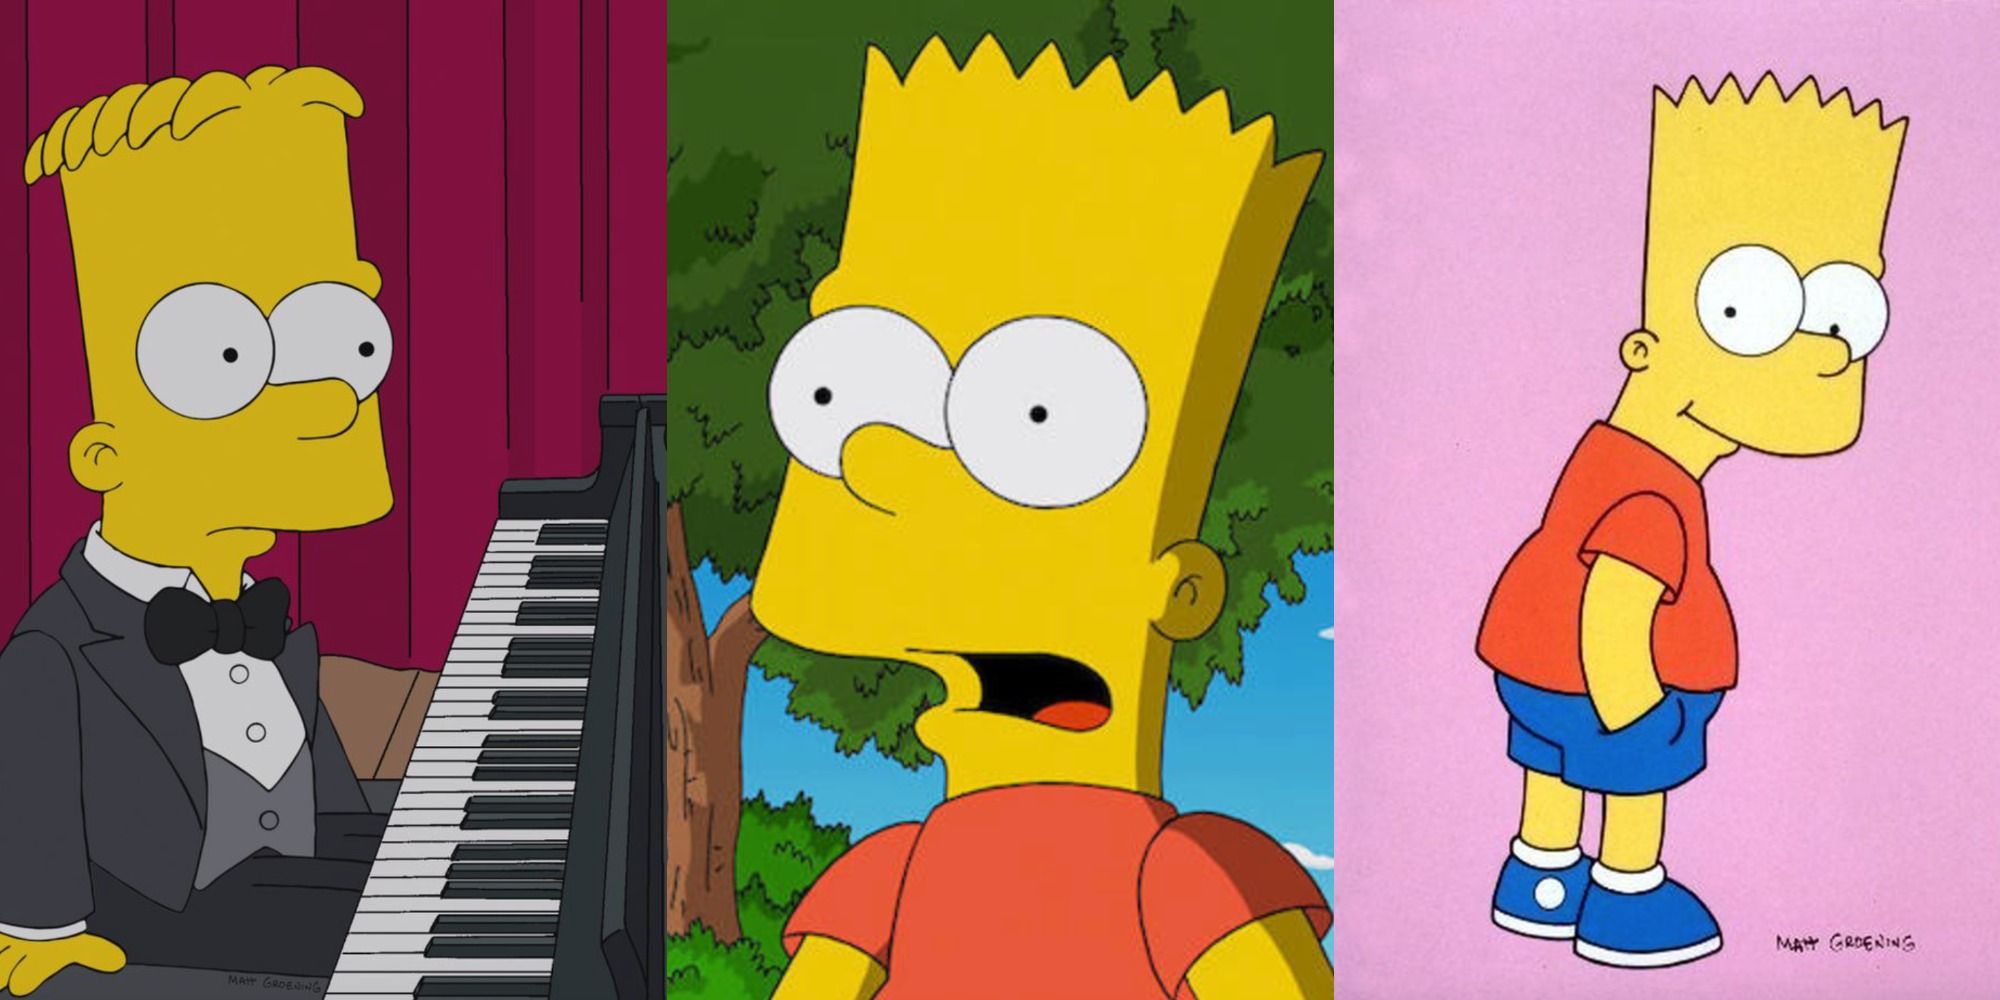 The Simpsons 10 Hidden Details You Missed About Bart